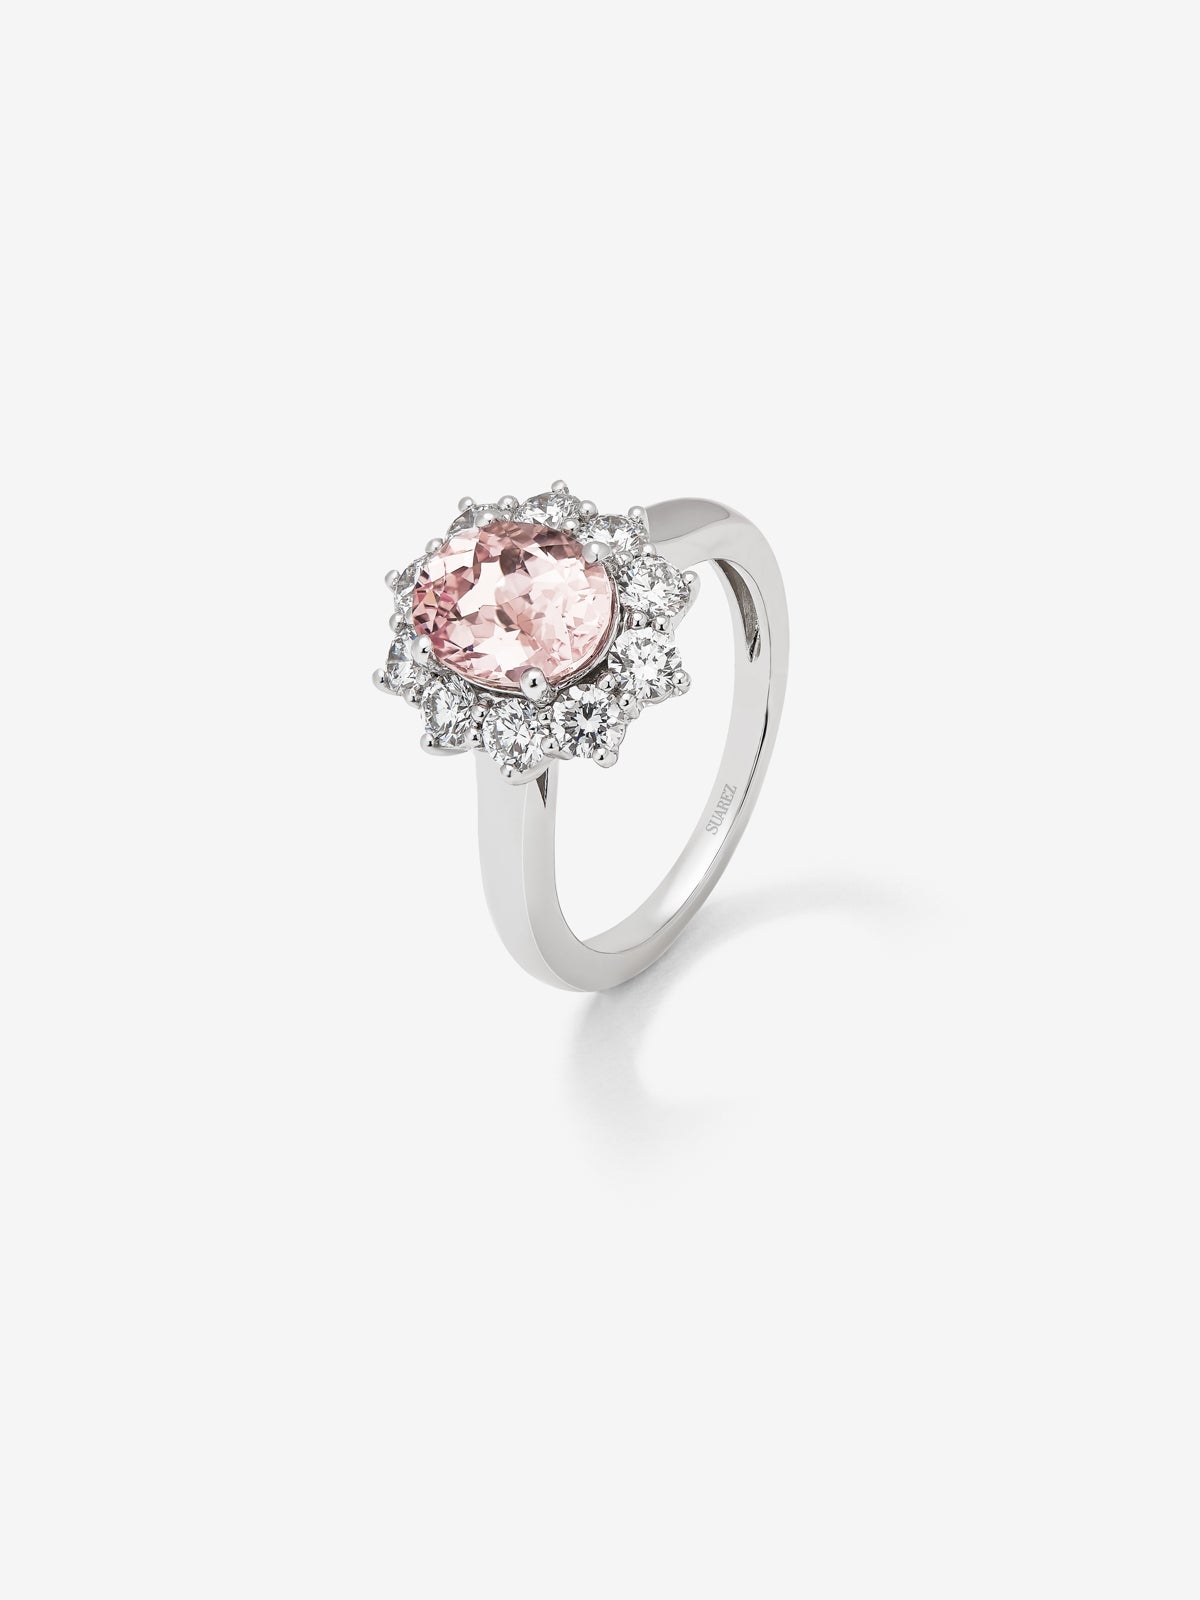 18K white gold ring with oval-cut pink morganite of 1.6 cts and 10 brilliant-cut diamonds with a total of 0.96 cts